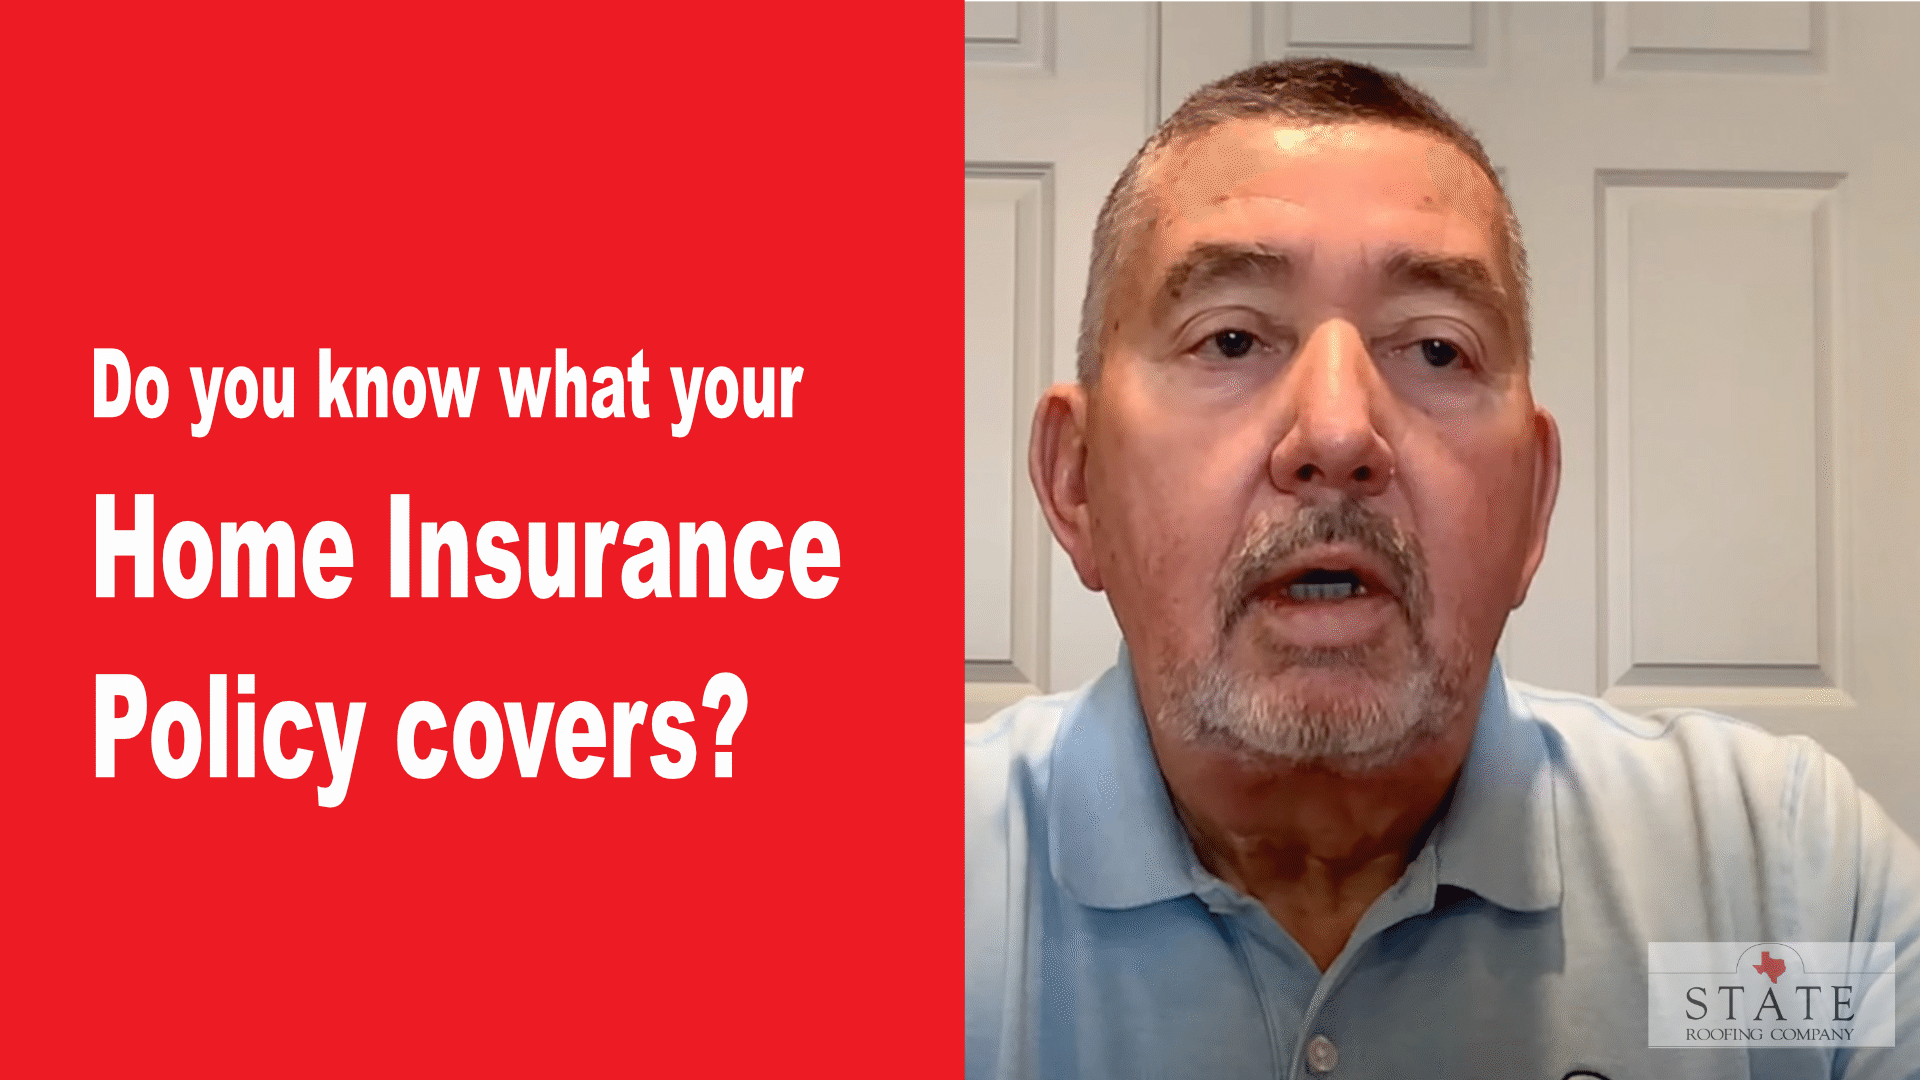 Do you know what your home insurance policy covers?